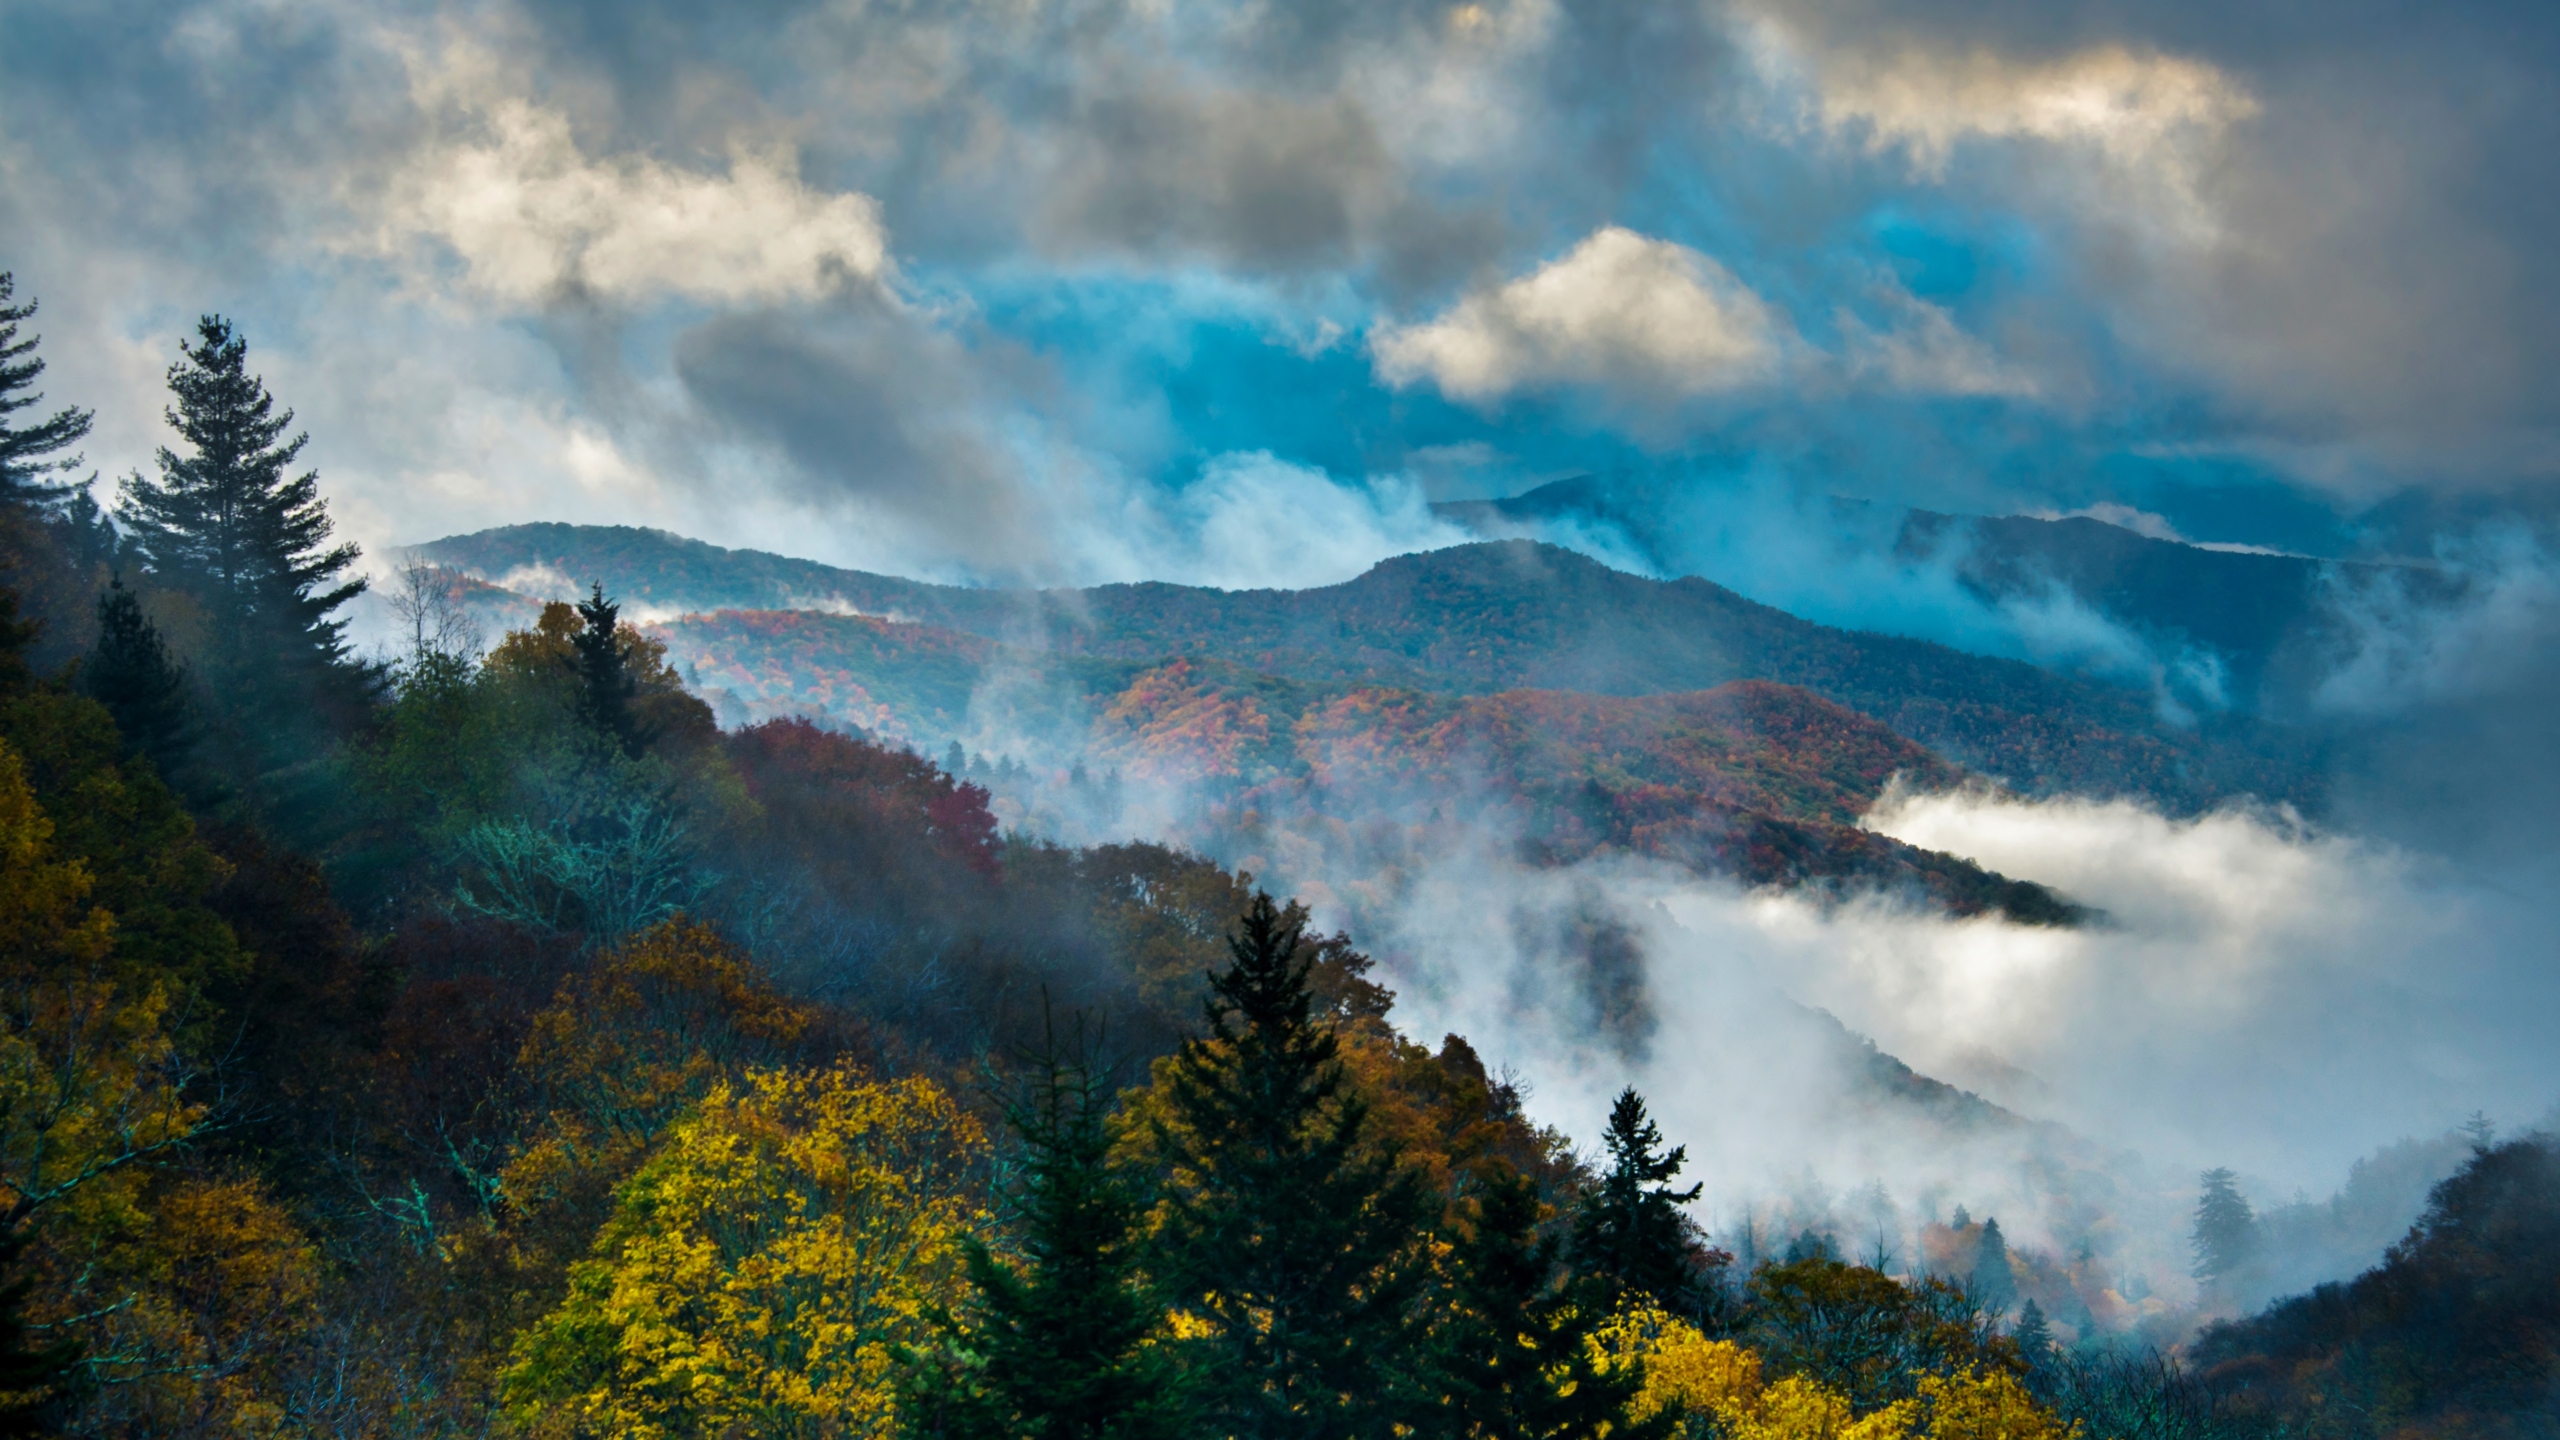 Great Smoky Mountains National Park marks 88th anniversary